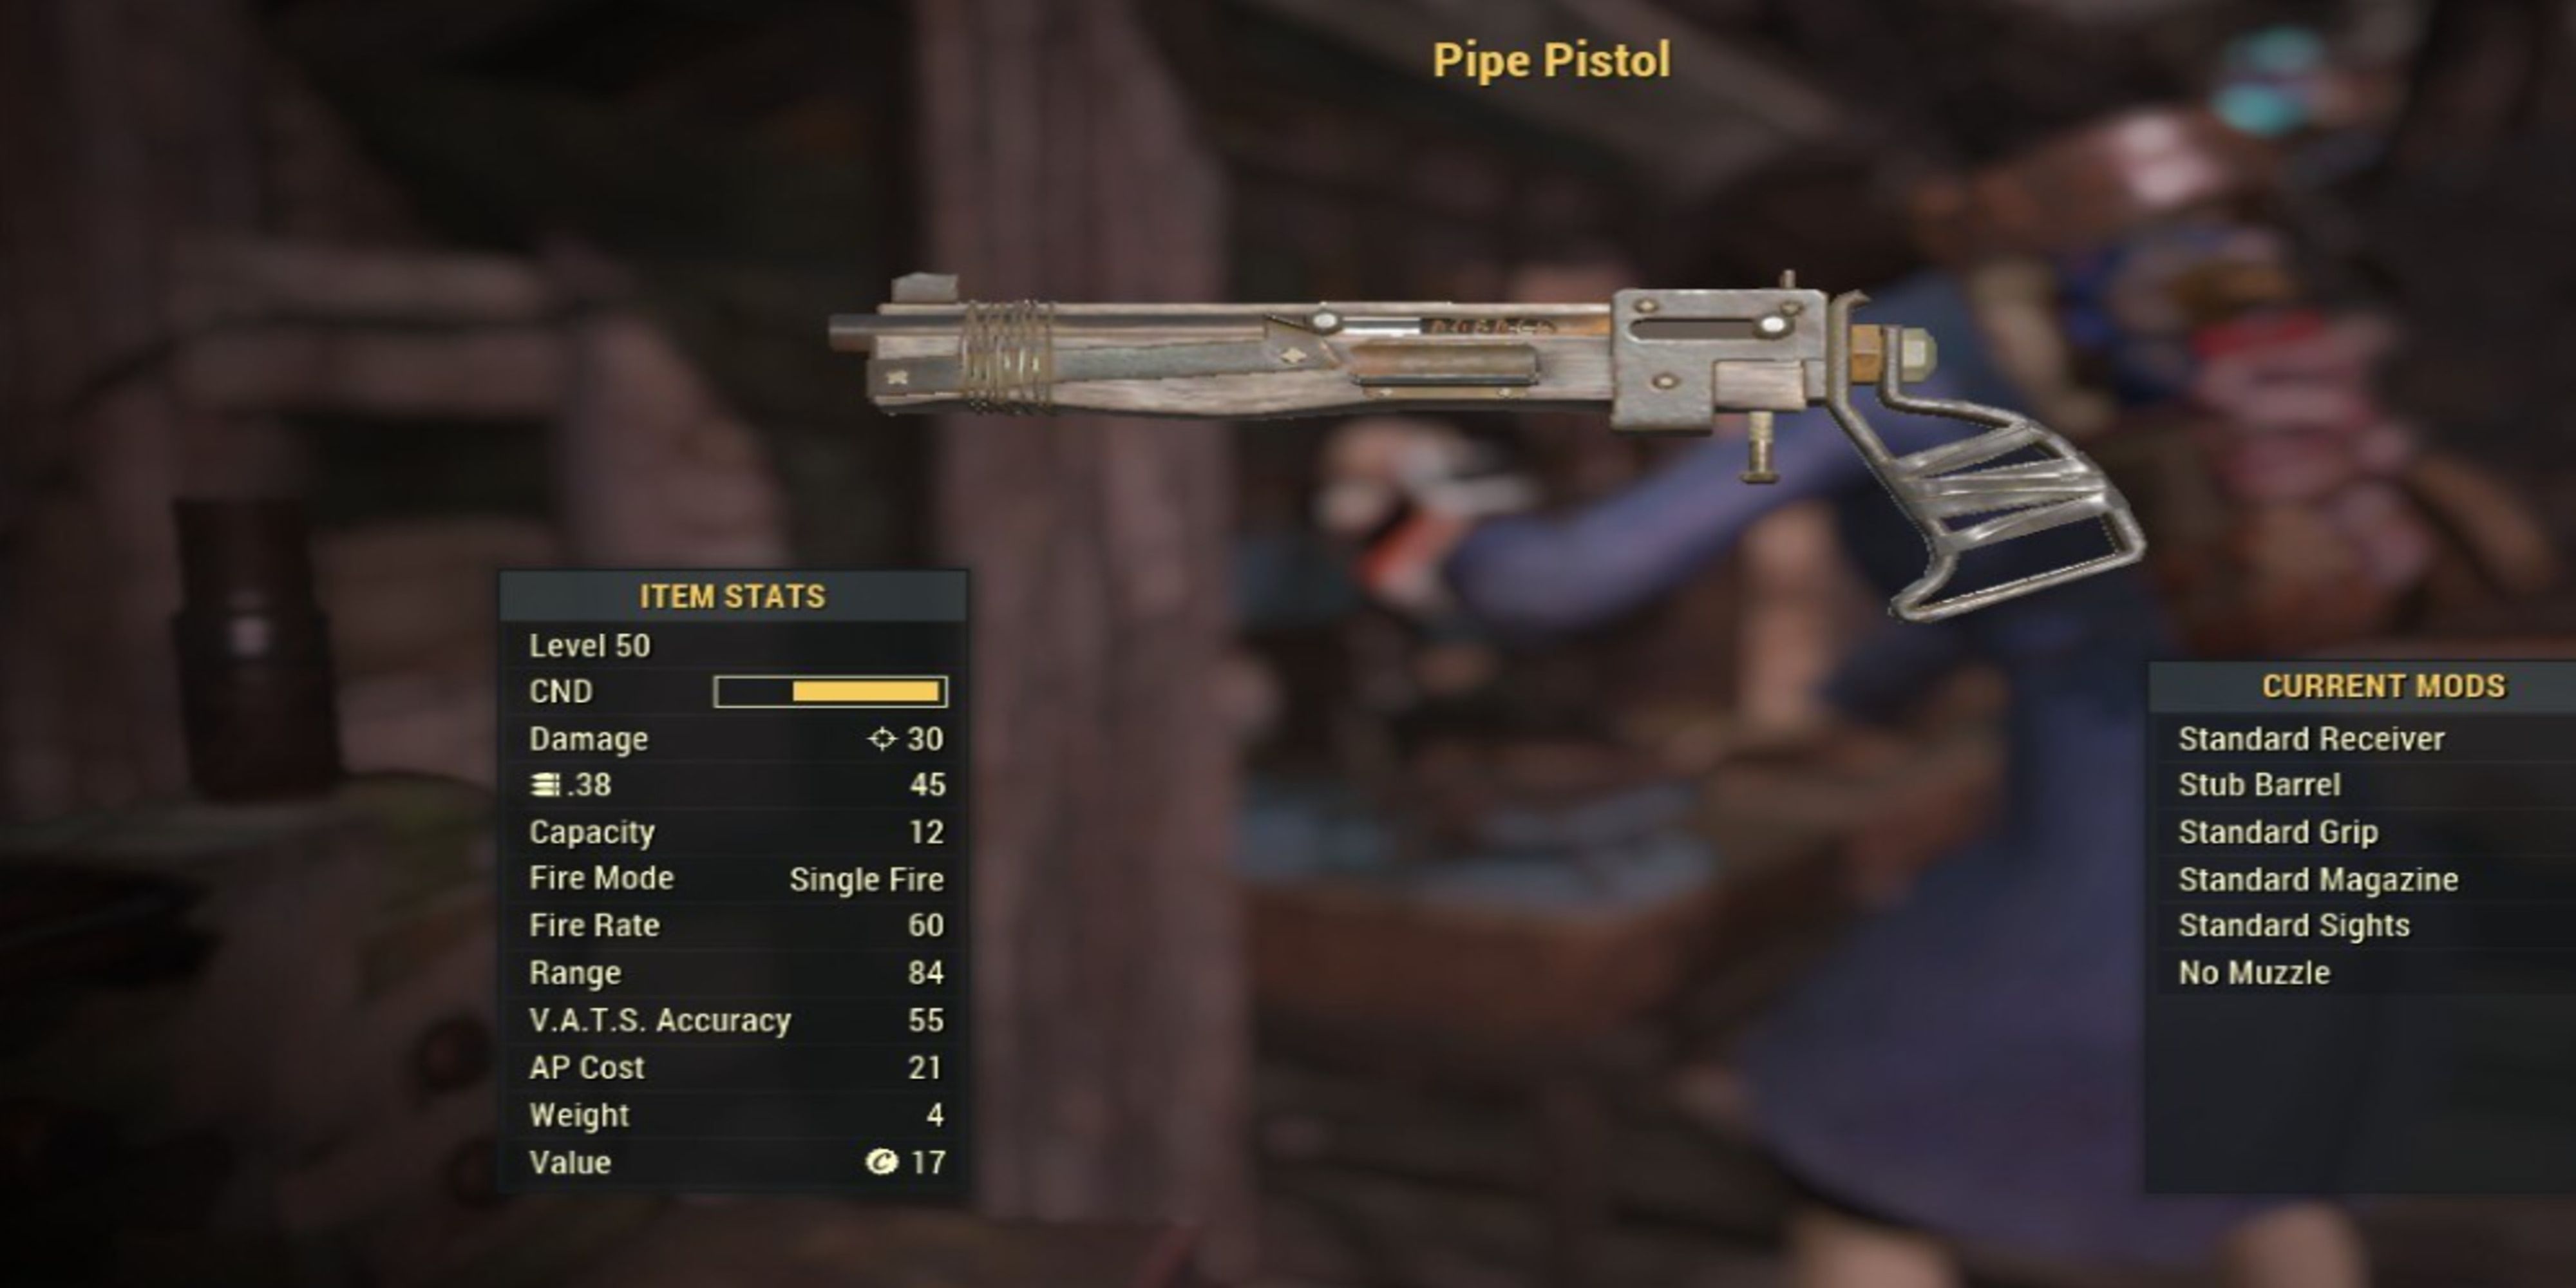 Inspecting a Pipe Pistol in Fallout 76